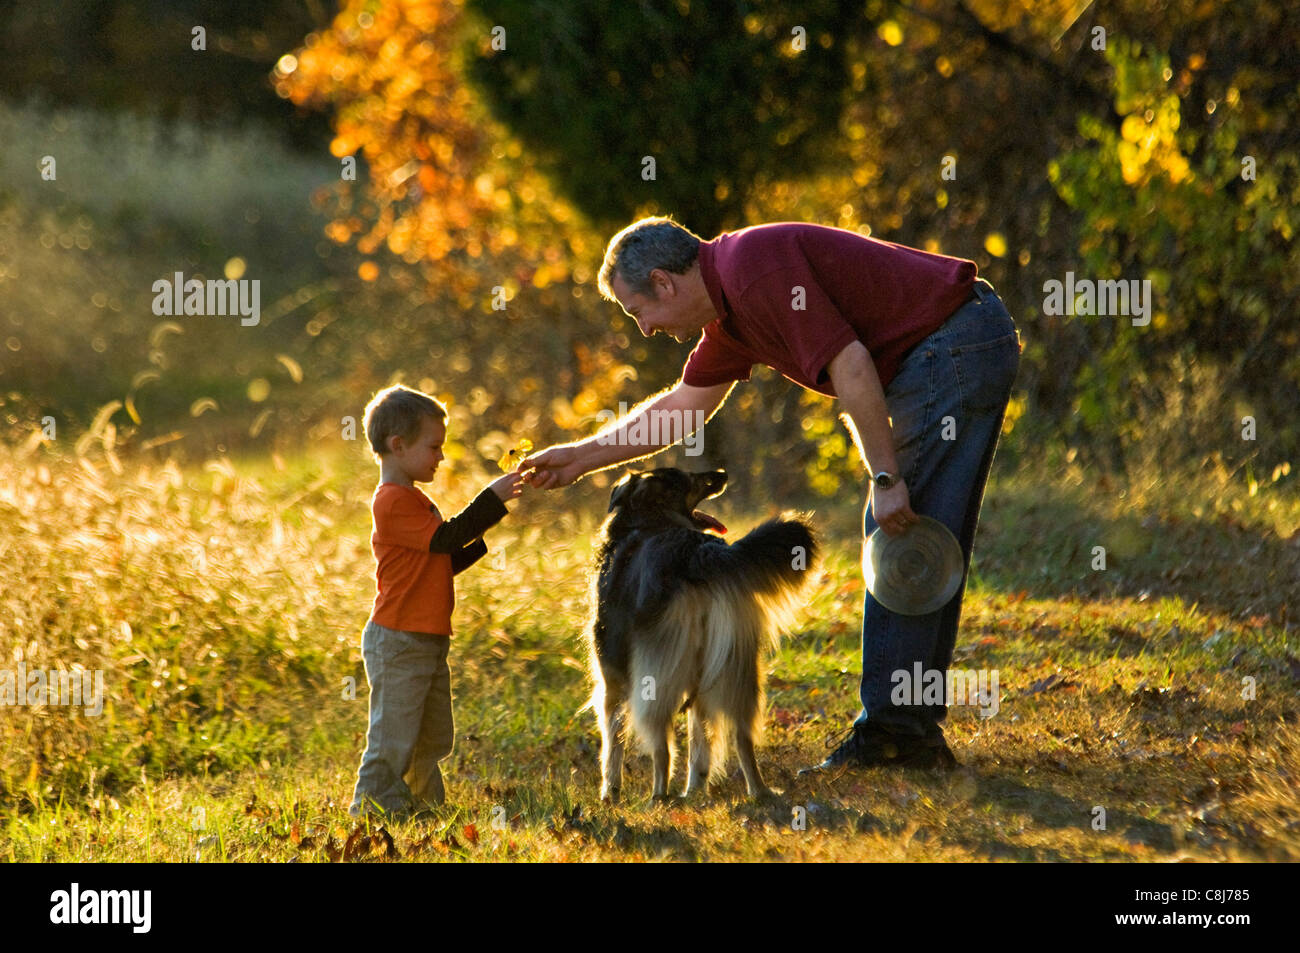 Grandfather Returning Flower to Grandson on a Autumn Evening in Floyd County, Indiana Stock Photo